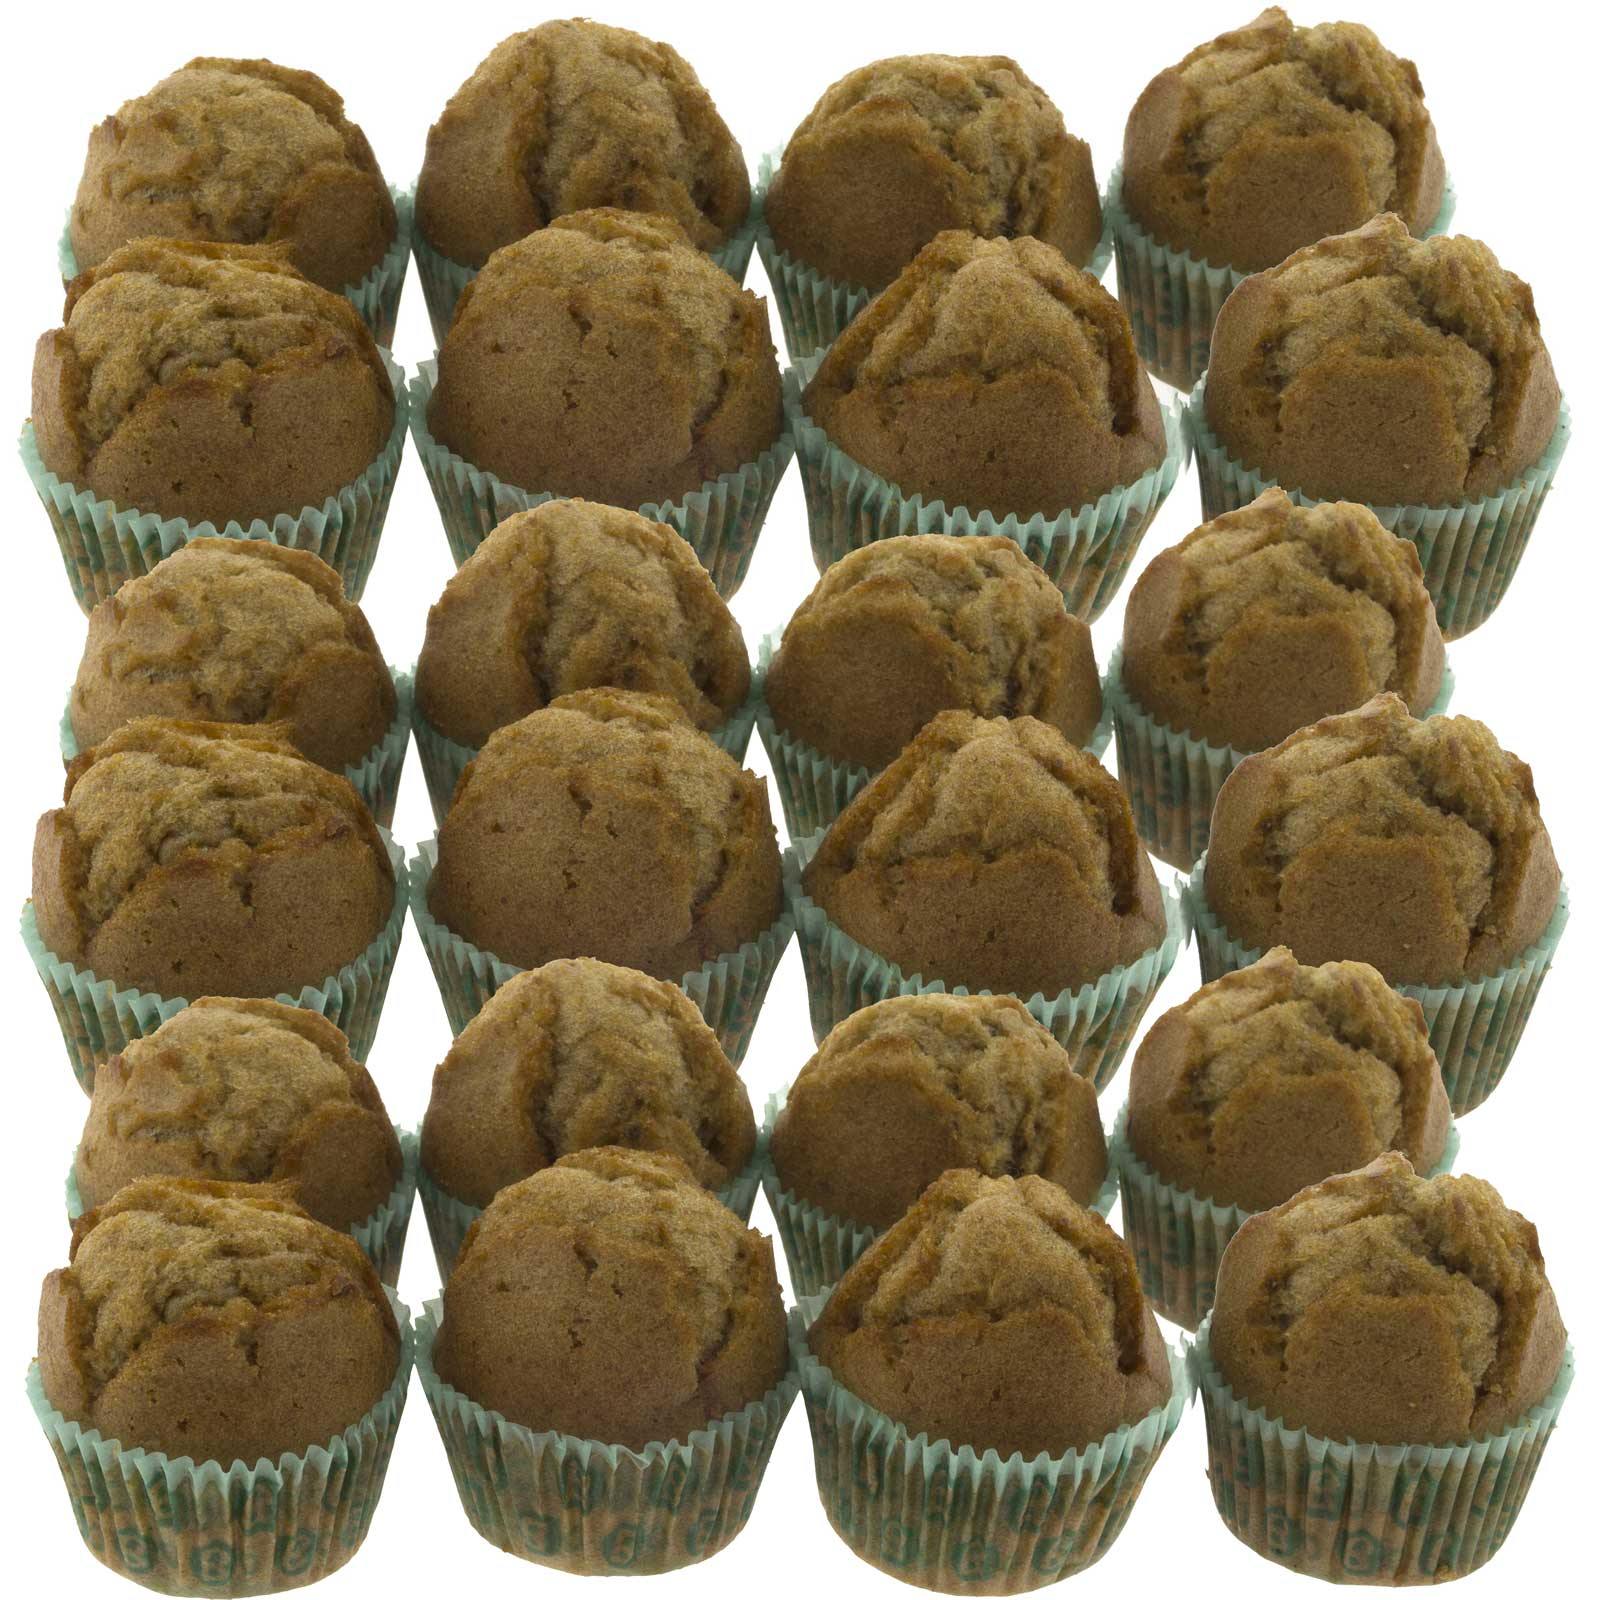 Cupcakes of integral spell without organic sugar 250g